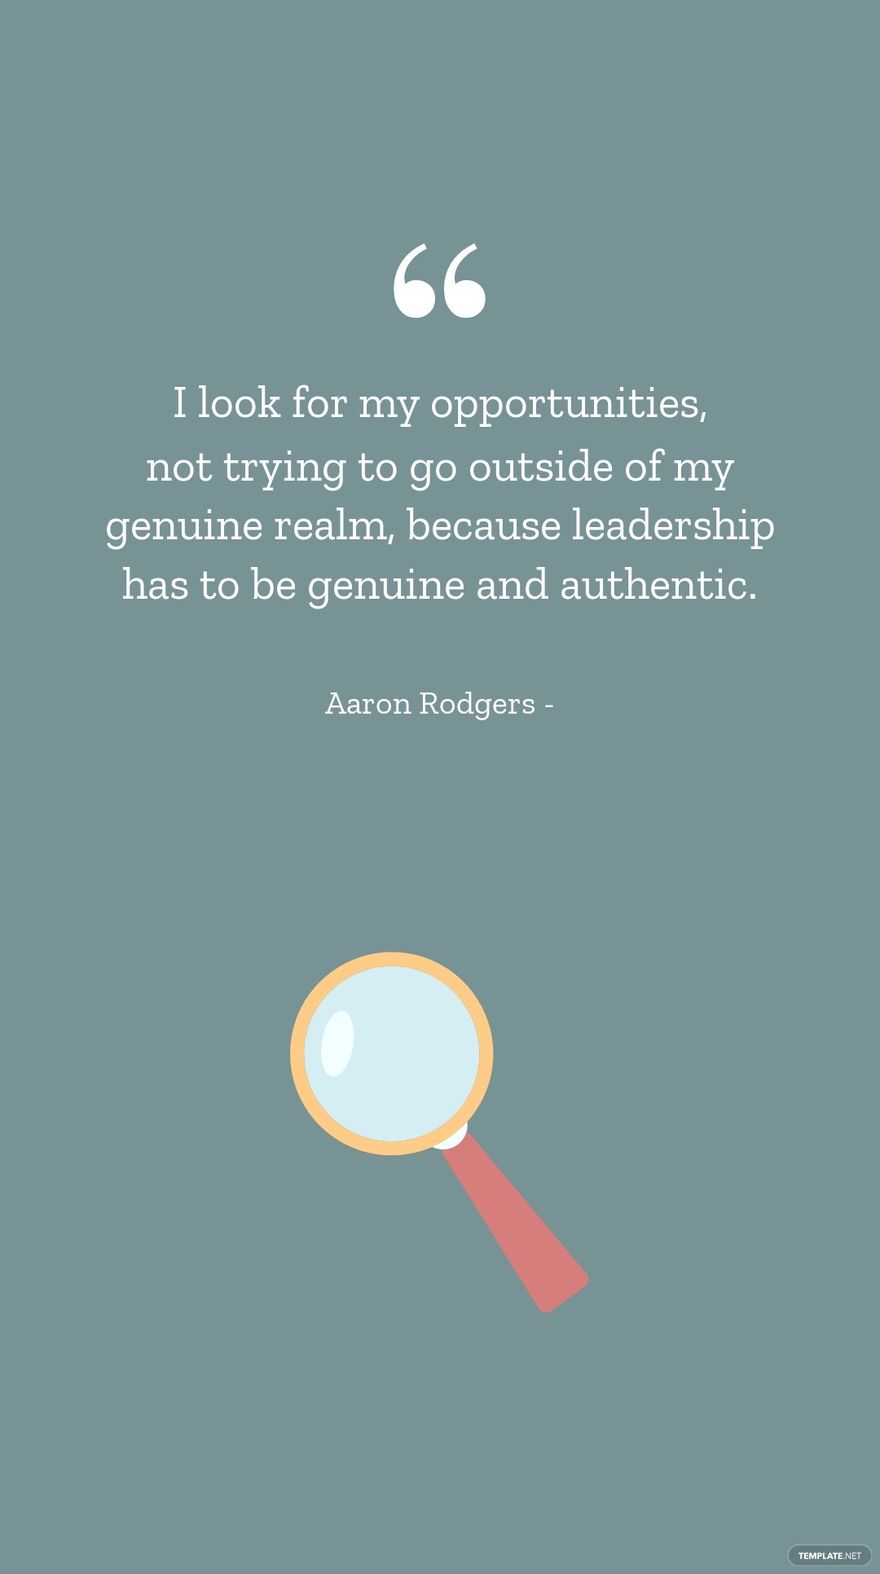 Free Aaron Rodgers - I look for my opportunities, not trying to go outside of my genuine realm, because leadership has to be genuine and authentic.